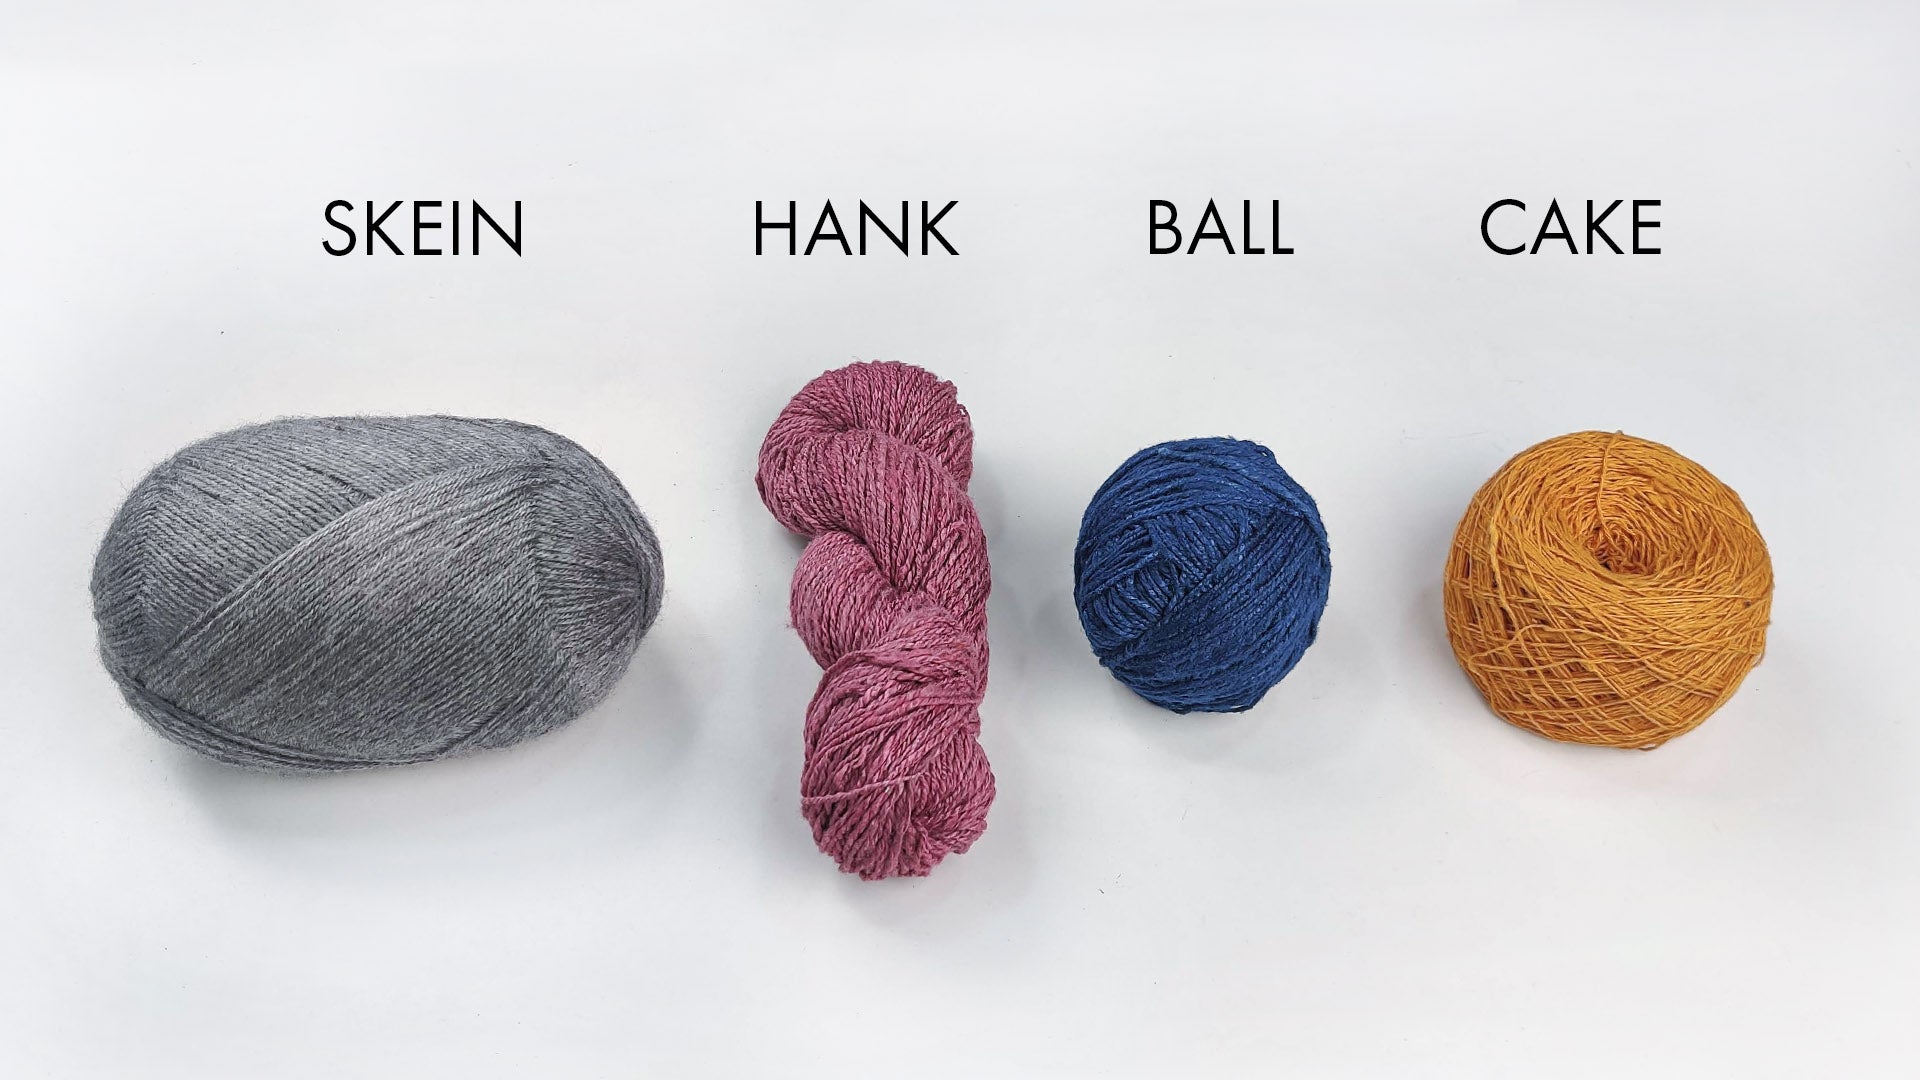 Turn A Skein To A Ball - Here's How!